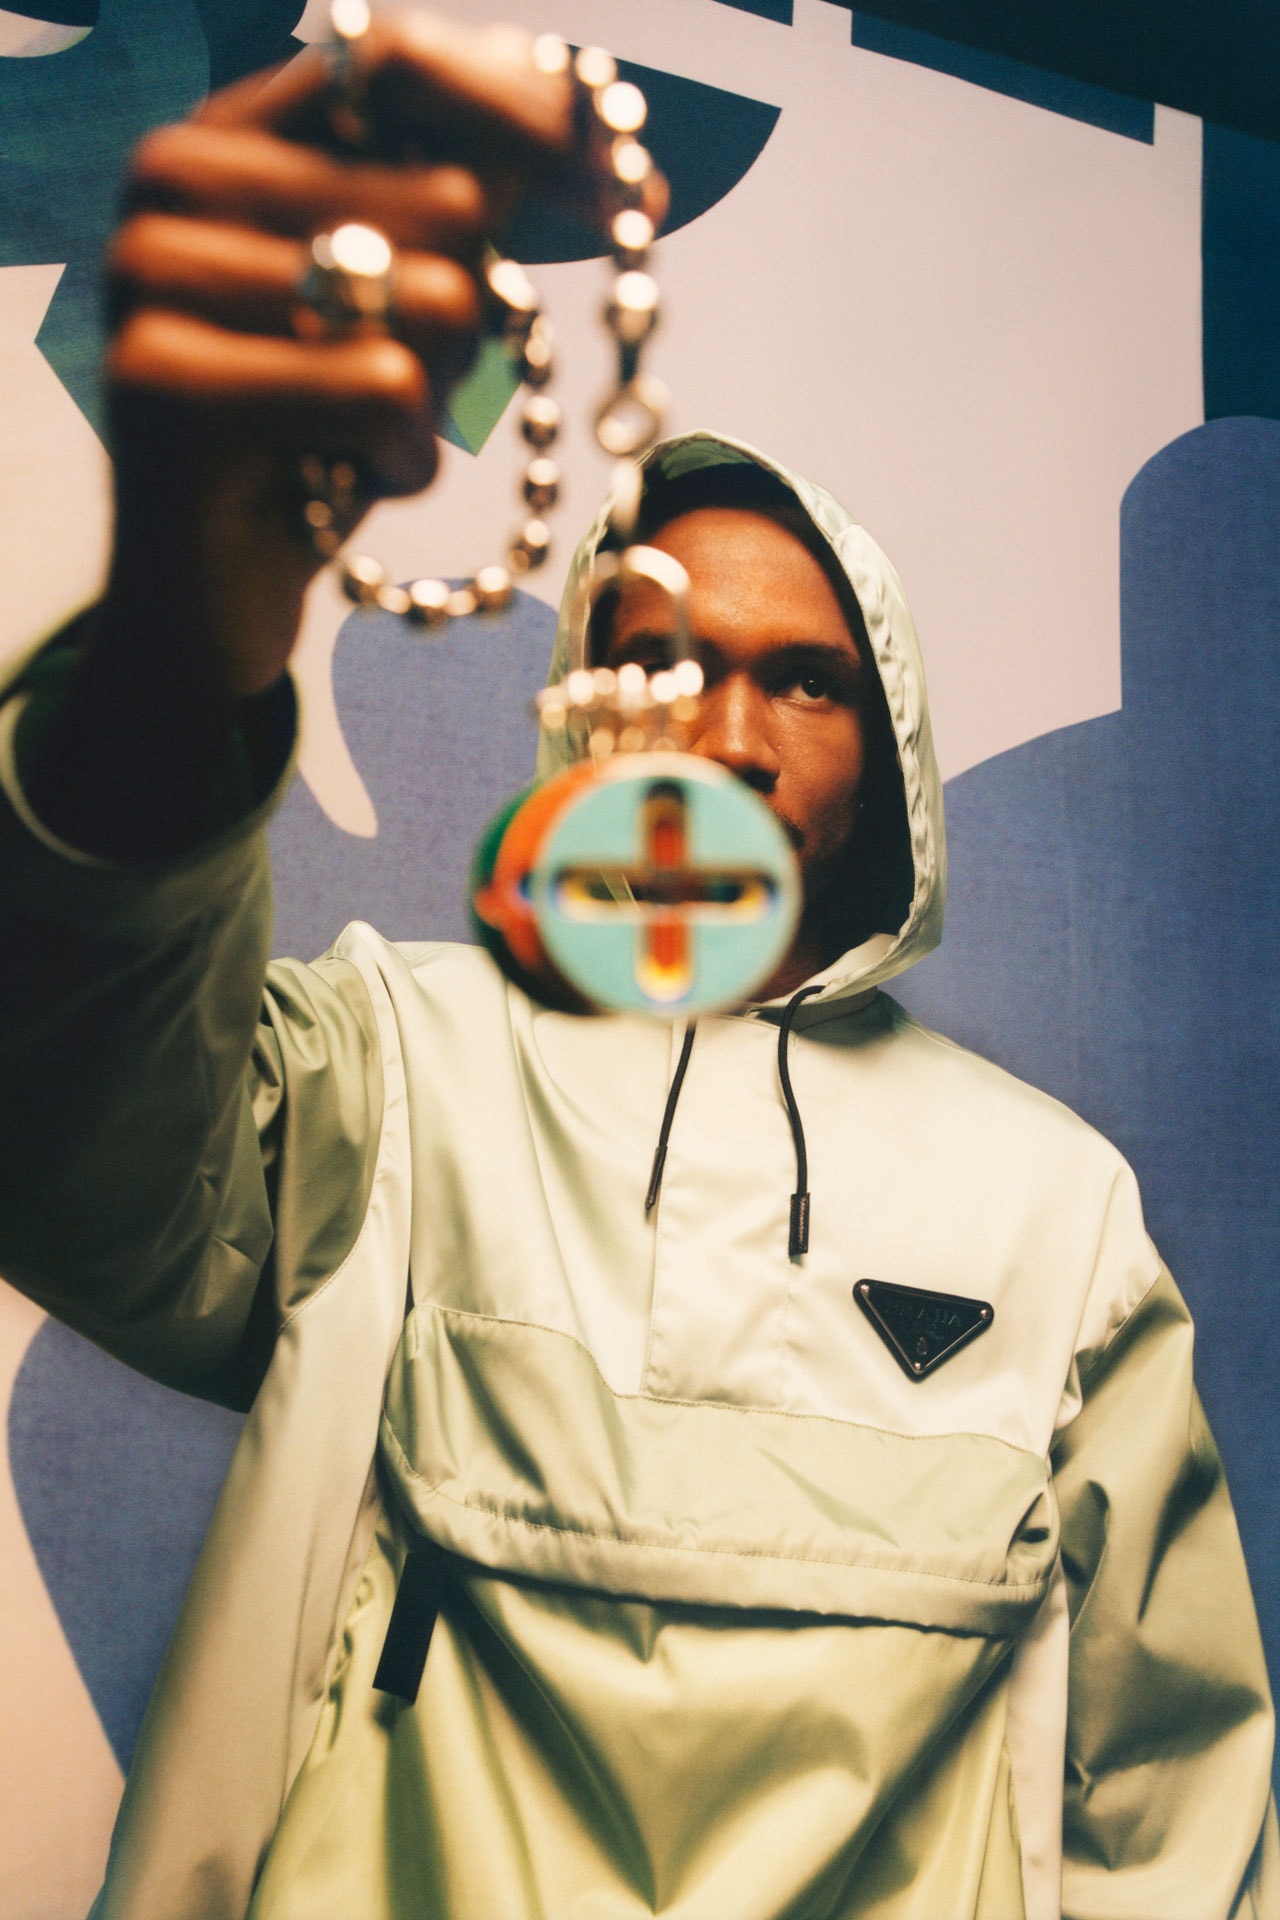 Frank Ocean’s Luxury Brand Homer Teams Up With Prada for Limited-Edition Collection